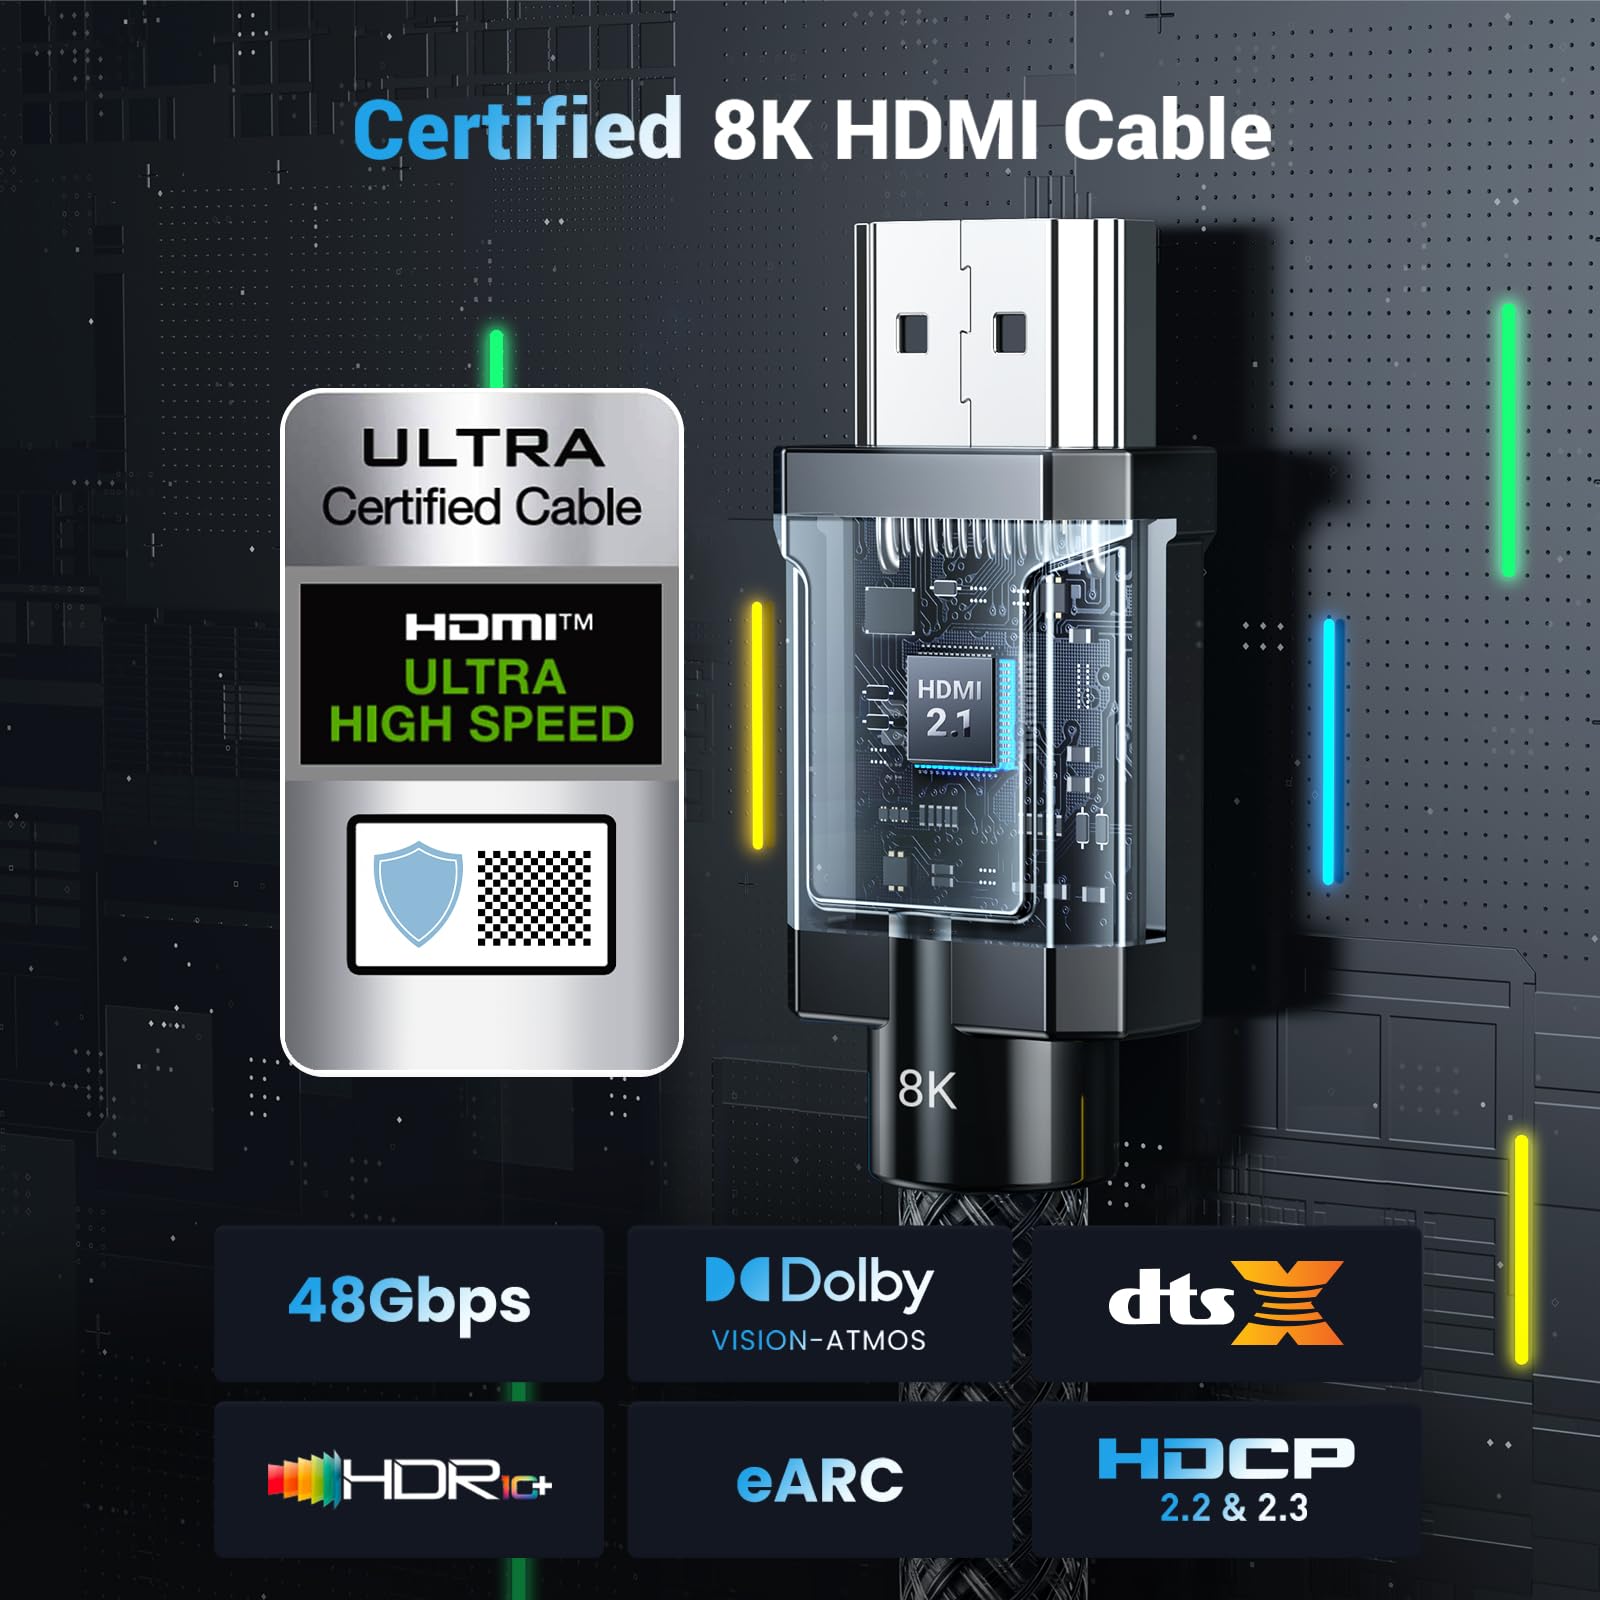 UGREEN 8K Certified HDMI 2.1 Cable 4K 120Hz, 48Gbps HDMI Cable 2.1 Ultra High Speed Support 8K 60Hz, 8K UHD, HDCP, Dynamic HDR, eARC, Dolby Atmos for PS5/4 Pro, Xbox One, Roku, TV Box, HDTV, 6.6 Feet